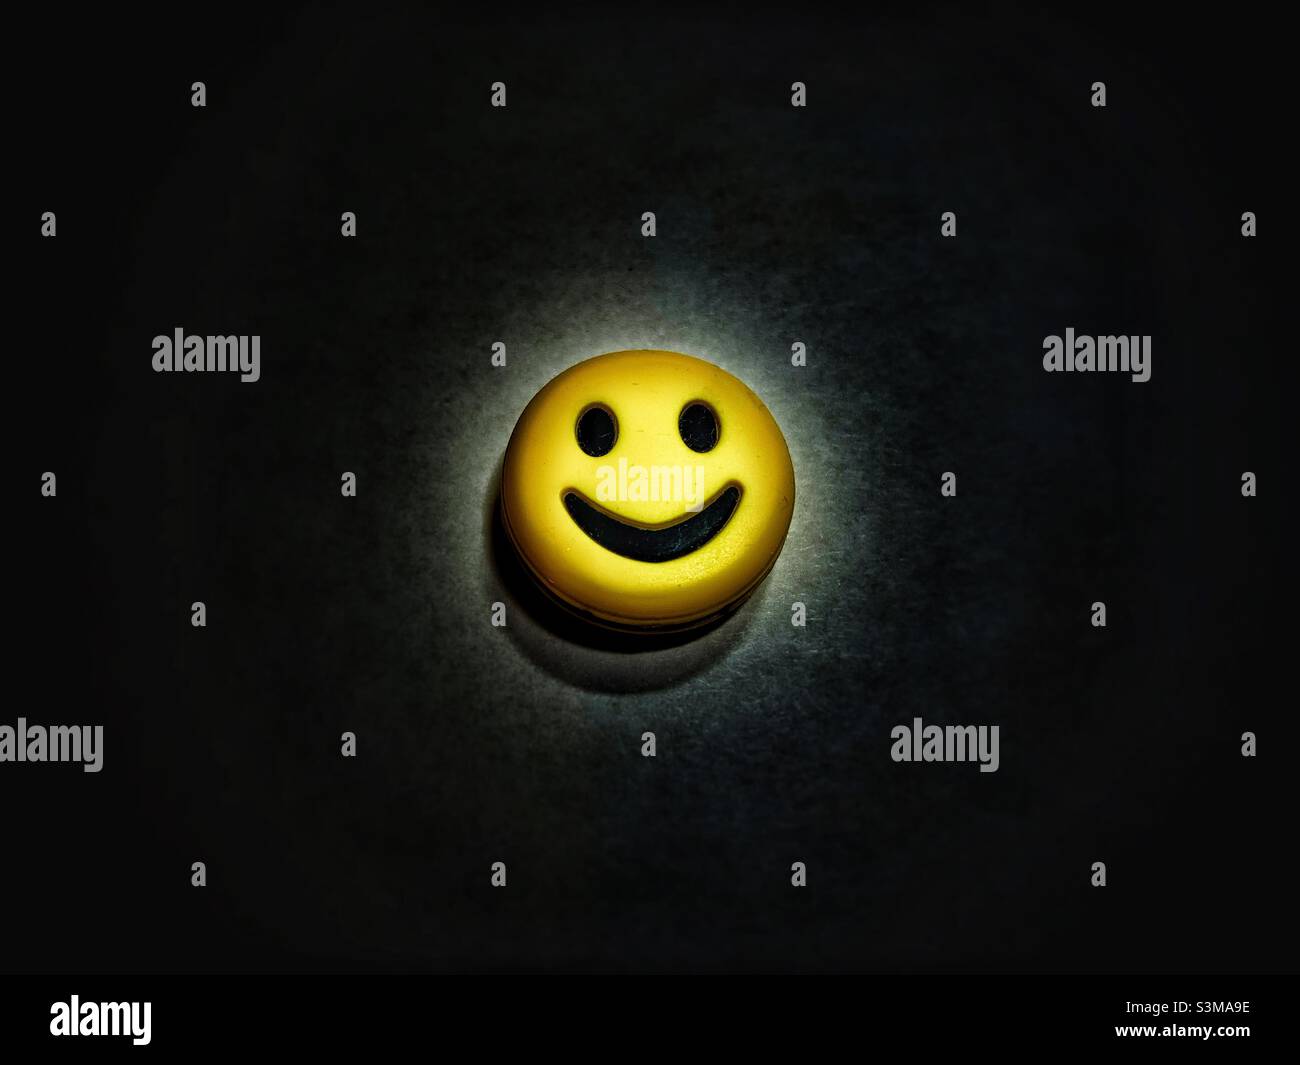 Yellow smiley face against black background. Stock Photo